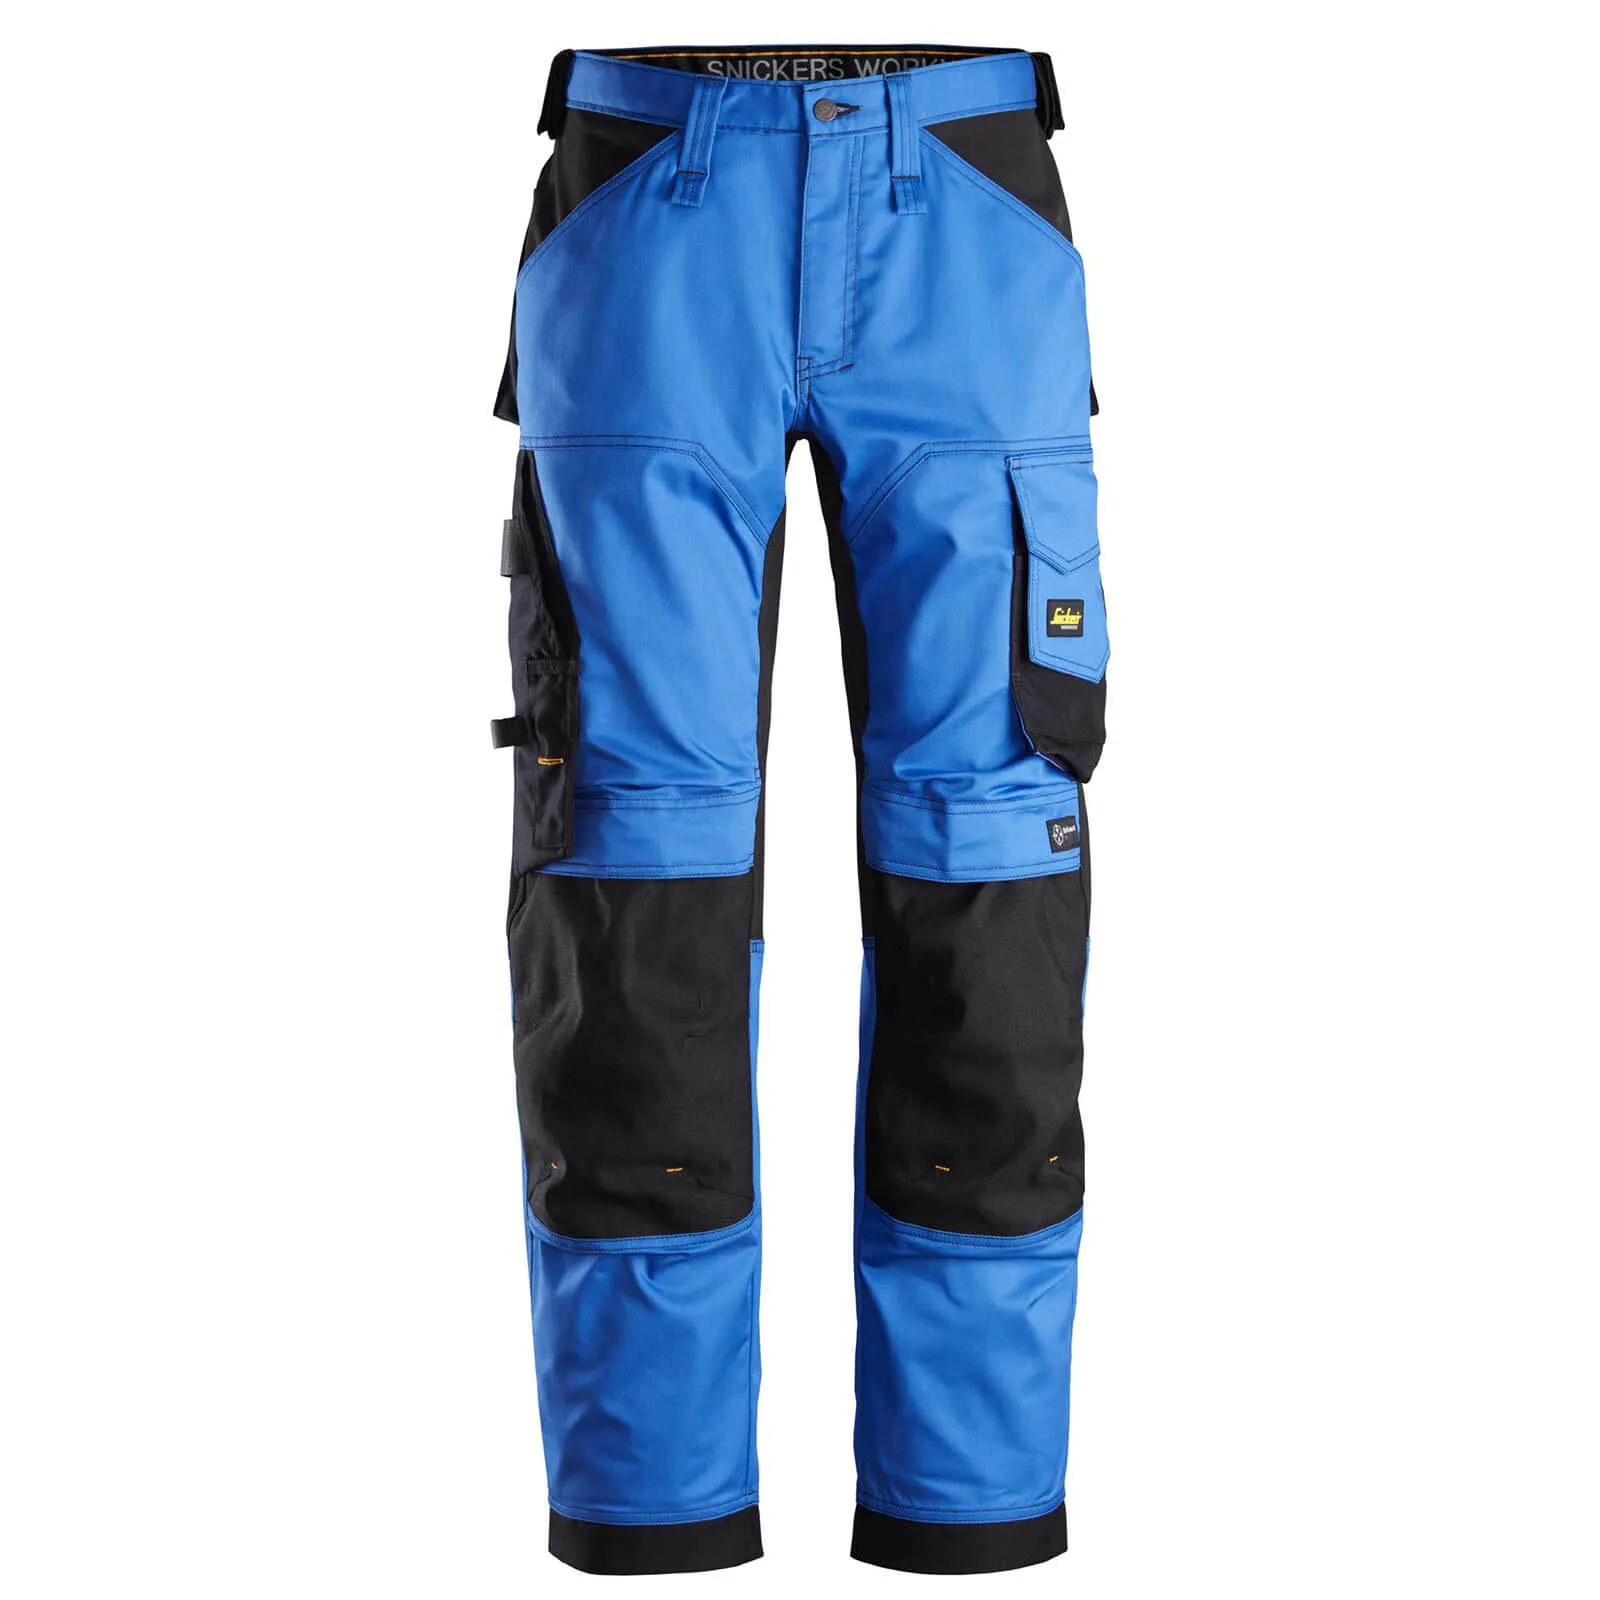 Snickers 6351 Allround Work Stretch Loose Fit Trousers - True Blue/Black, 31", 30"